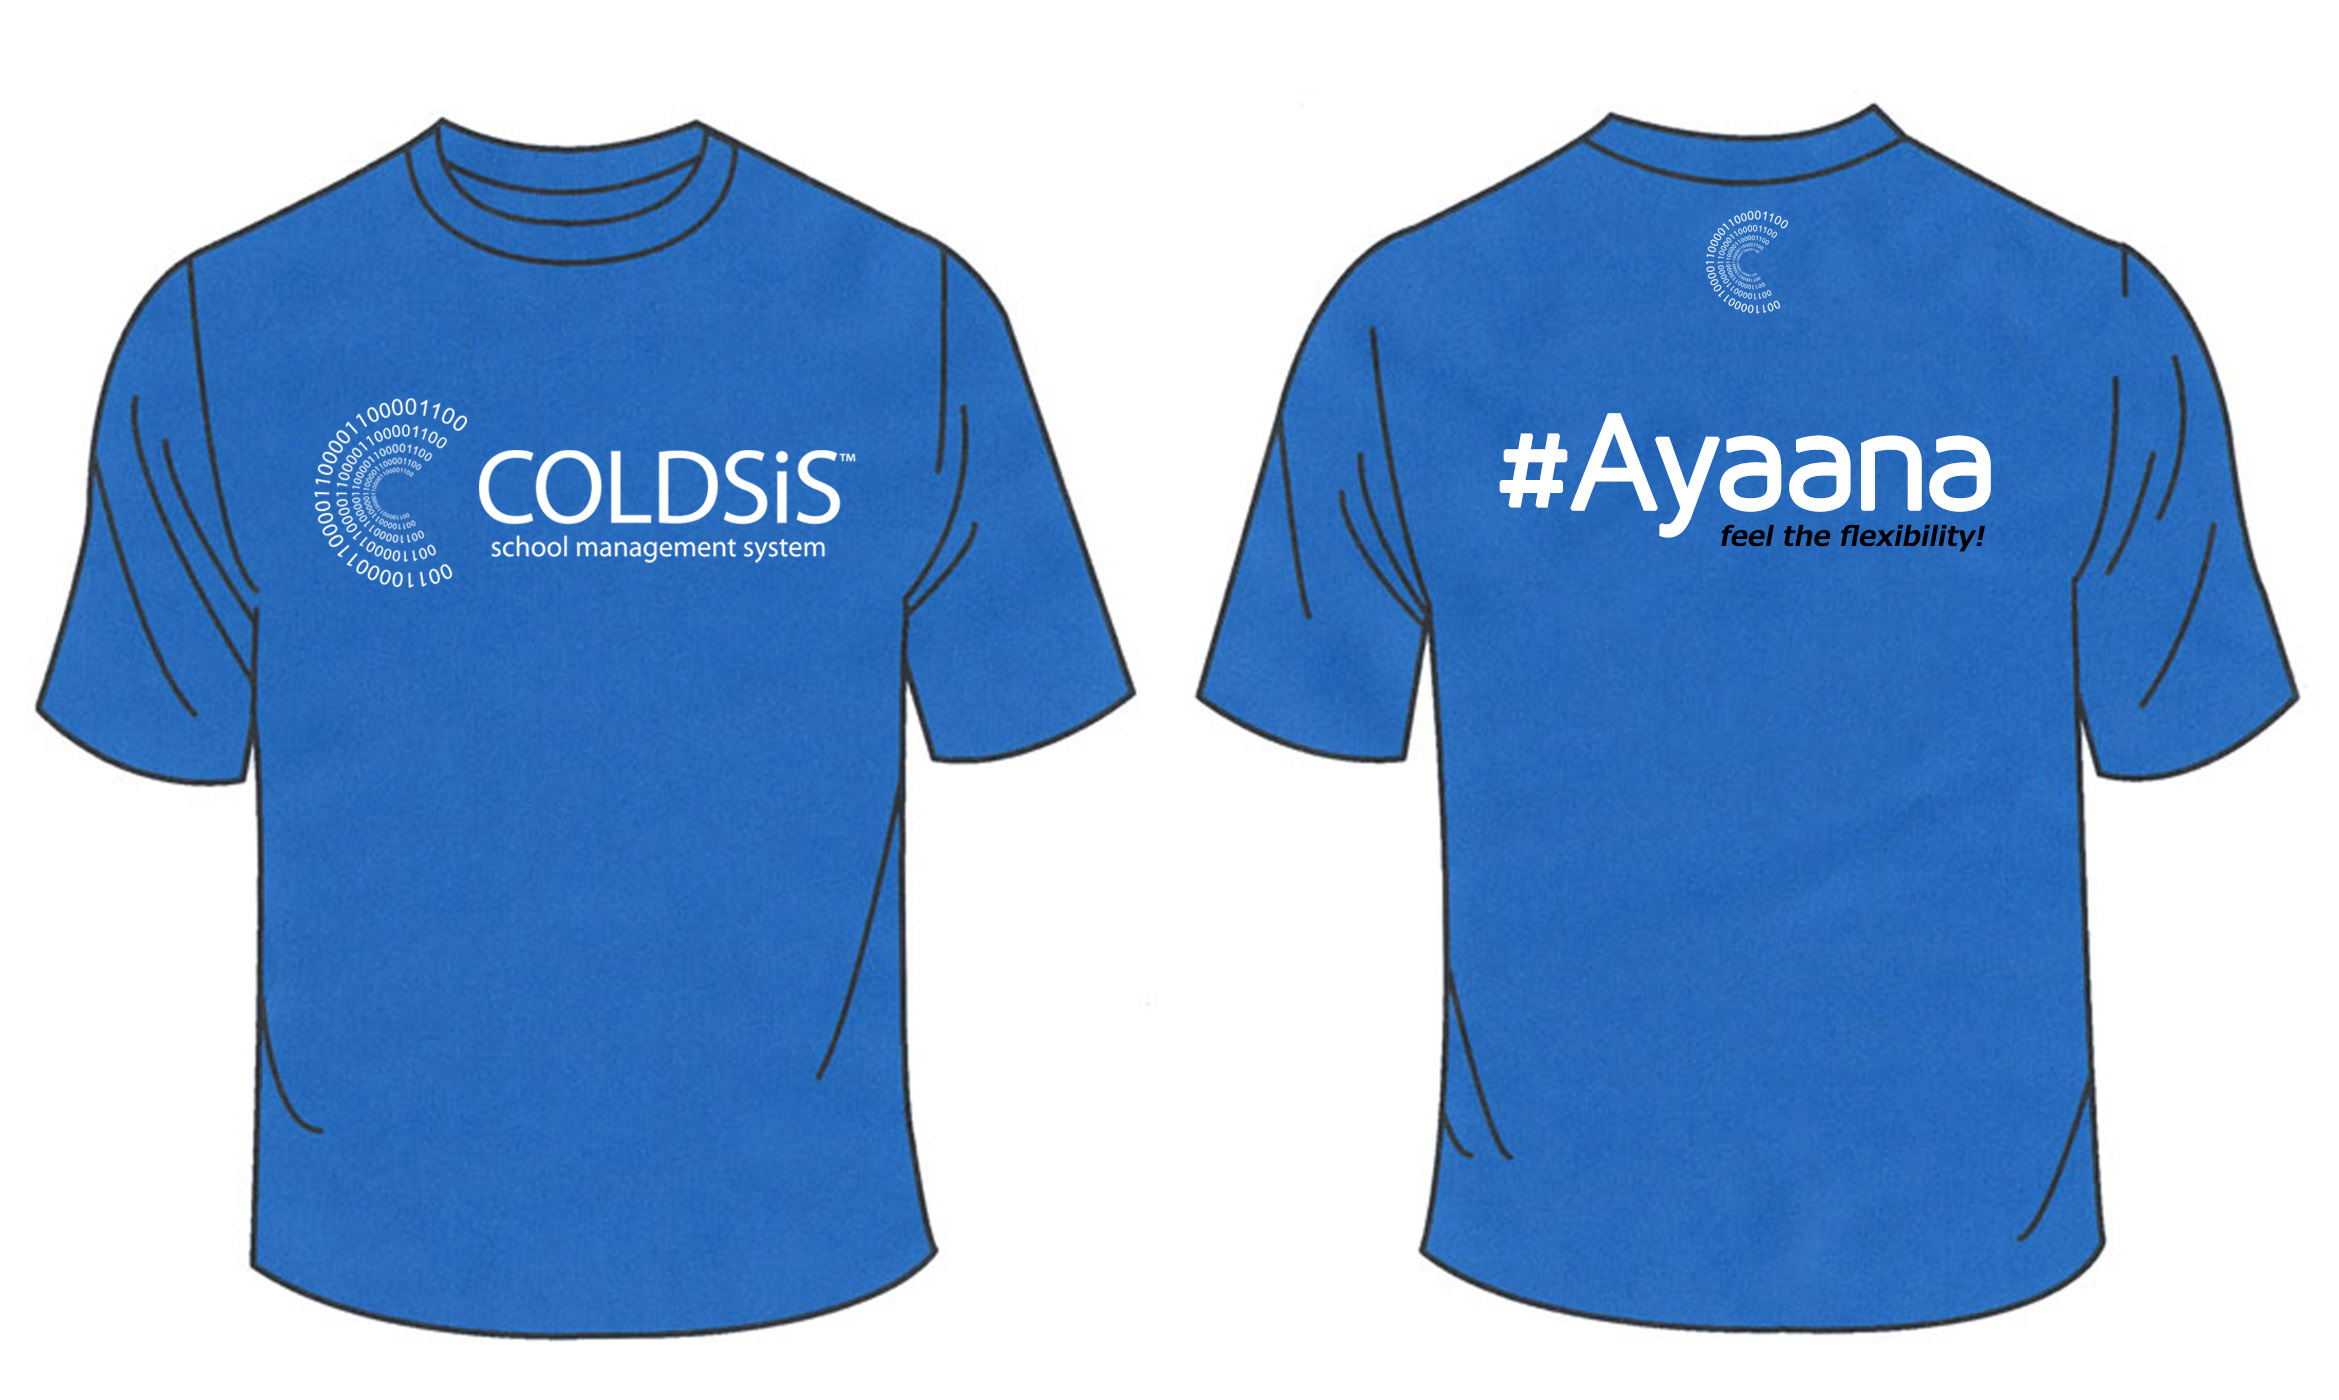 COLDSiS™ Ayaana is here  Image